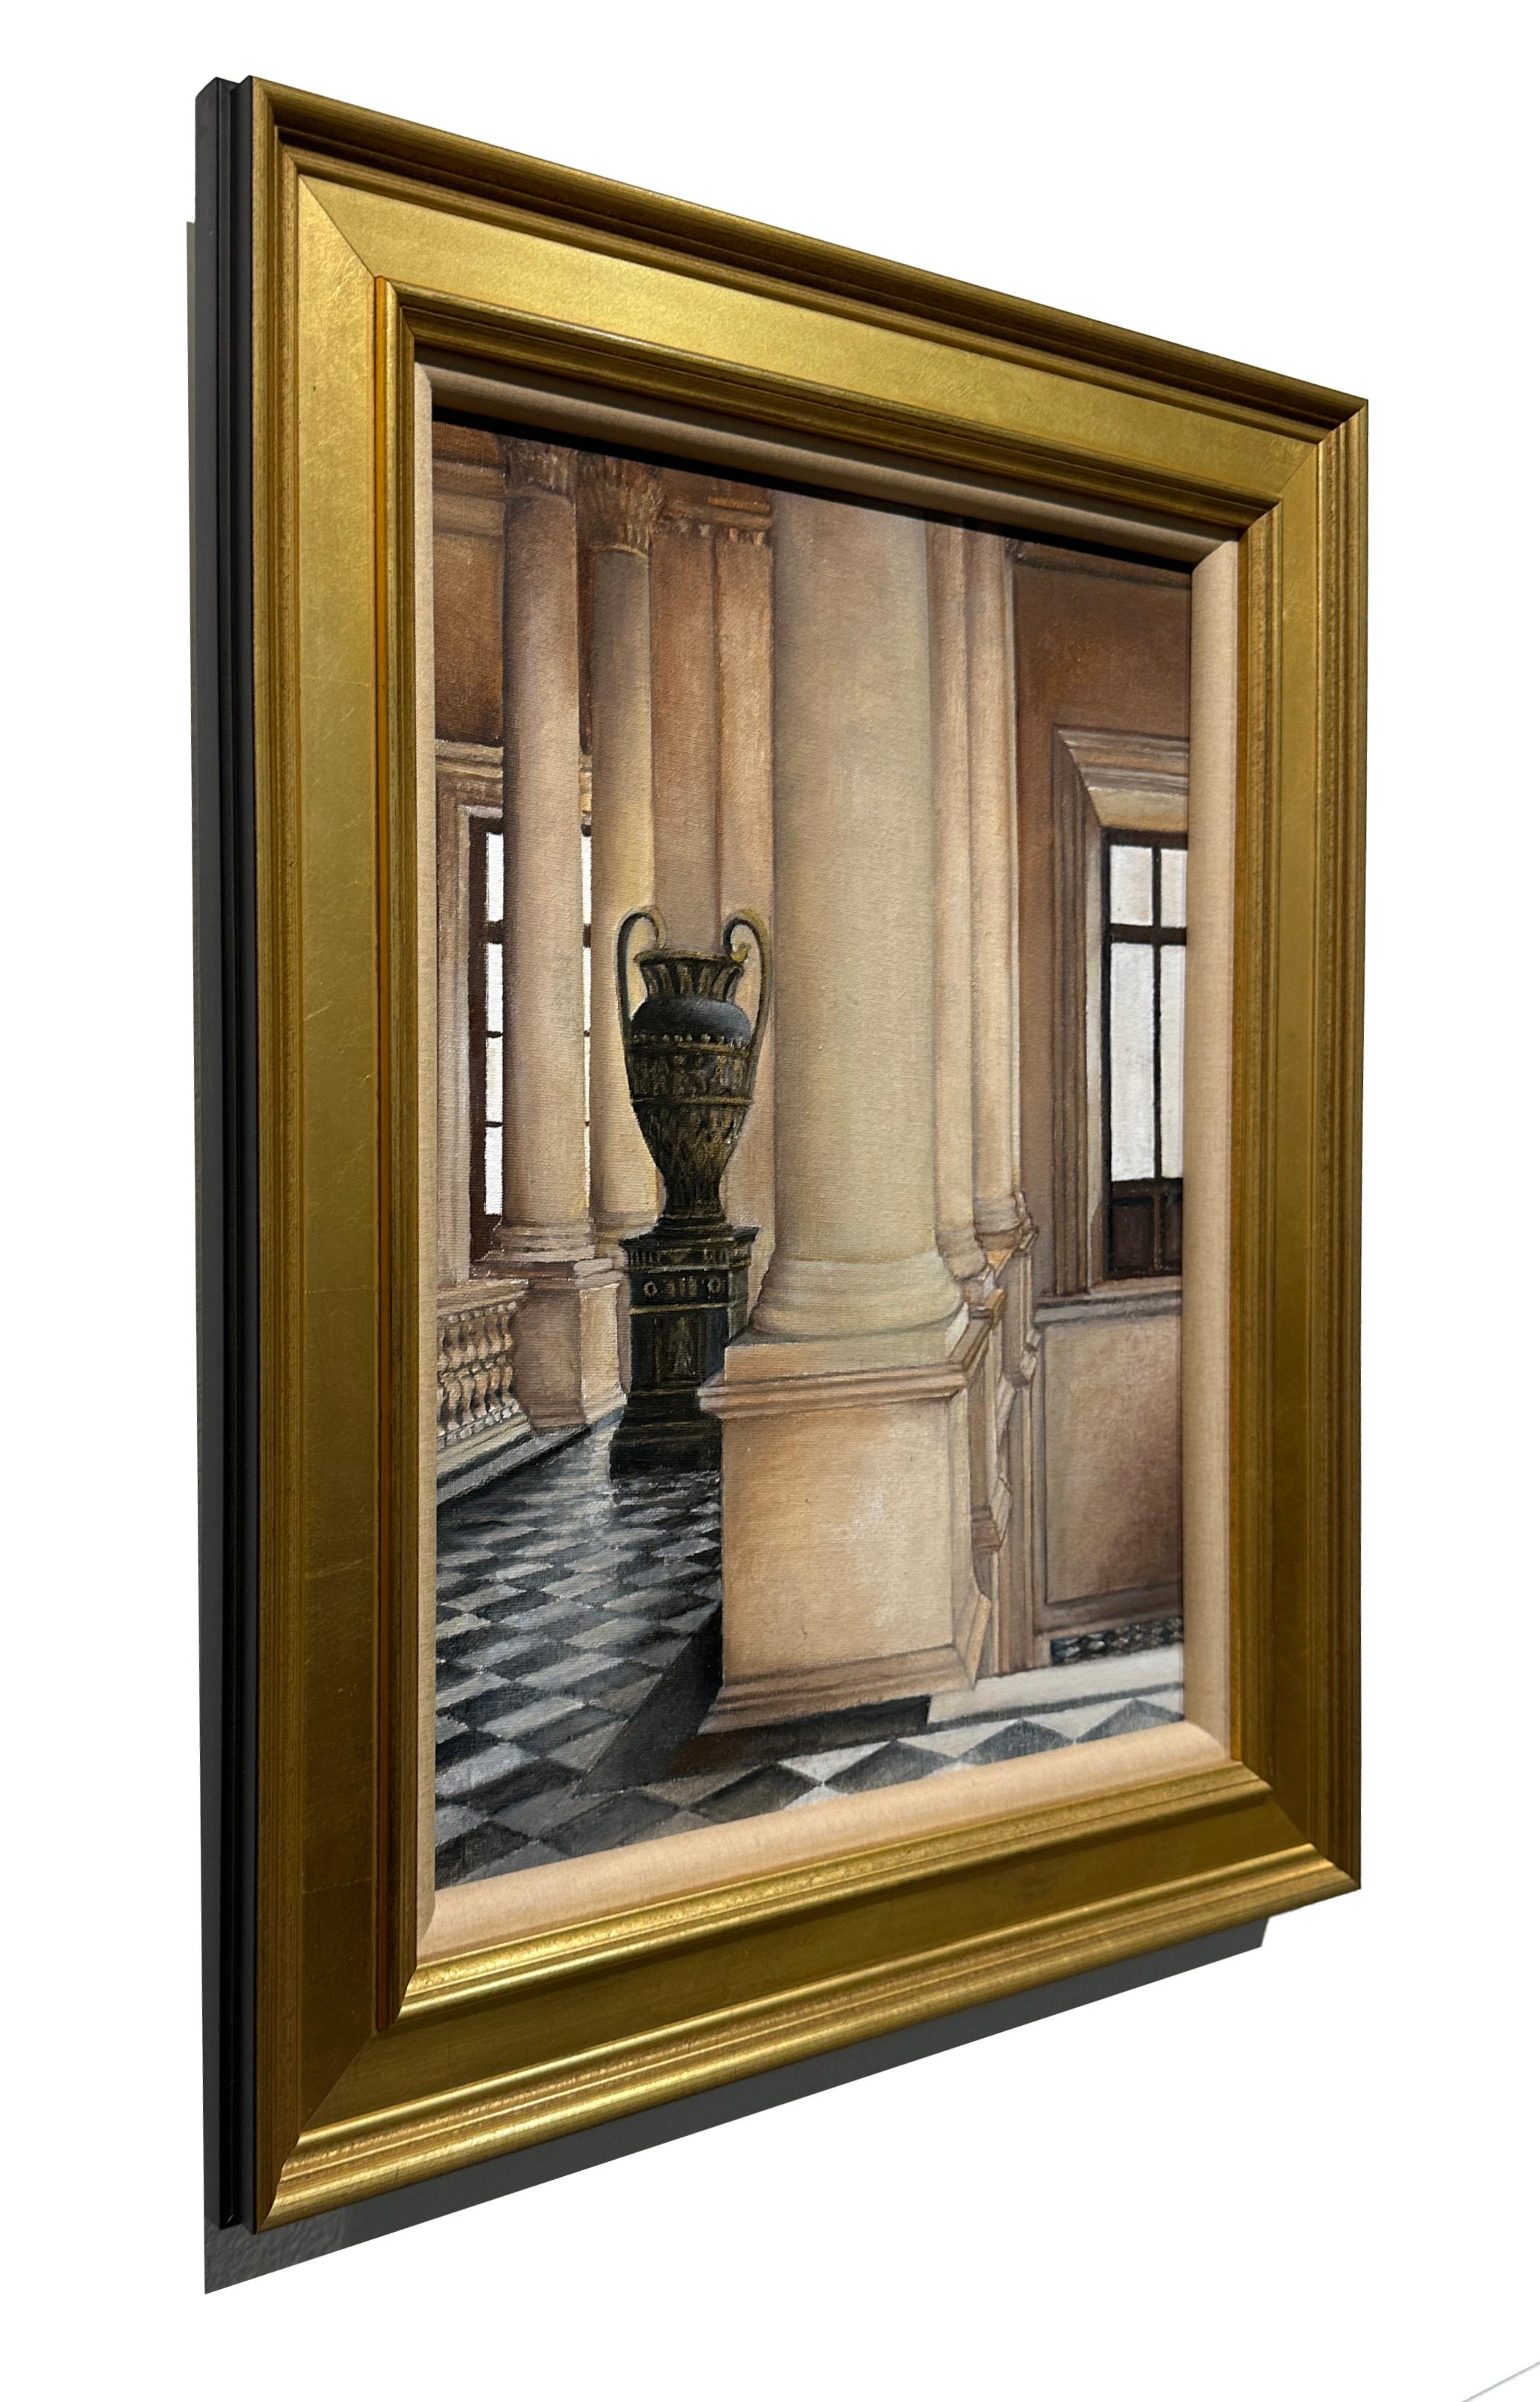 The Louvre - Interior Architectural Scene, Framed, Original Oil on Canvas - Contemporary Painting by Richard Gibbons